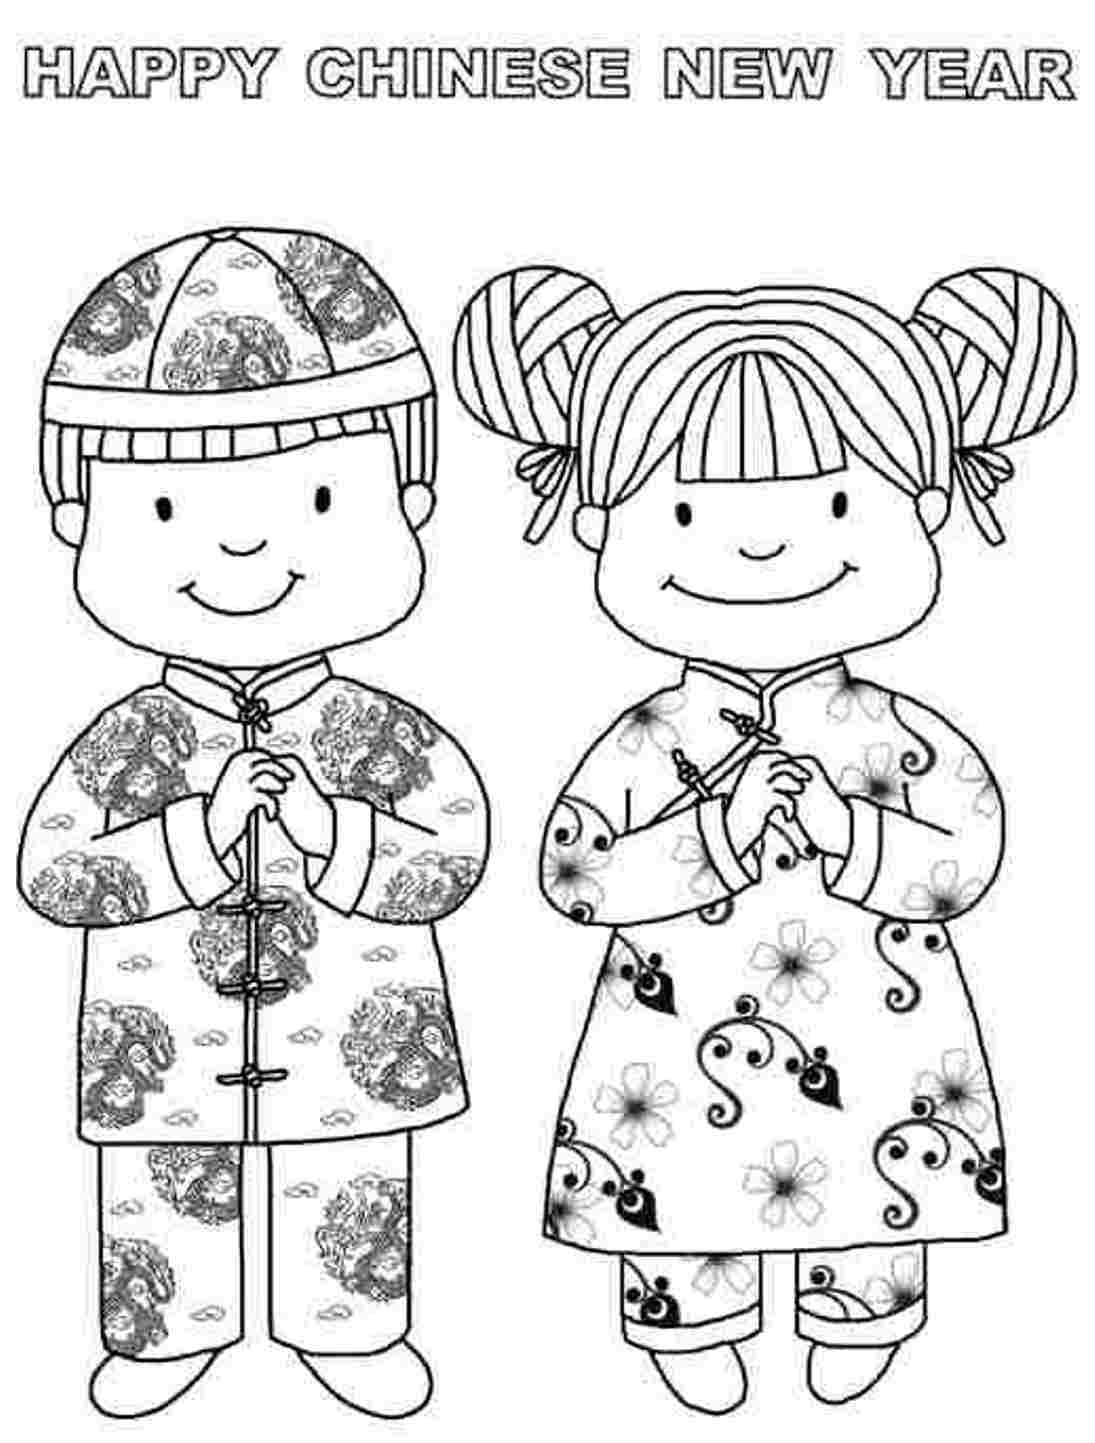 Chinese New Year Coloring Pages   Best Coloring Pages For Kids